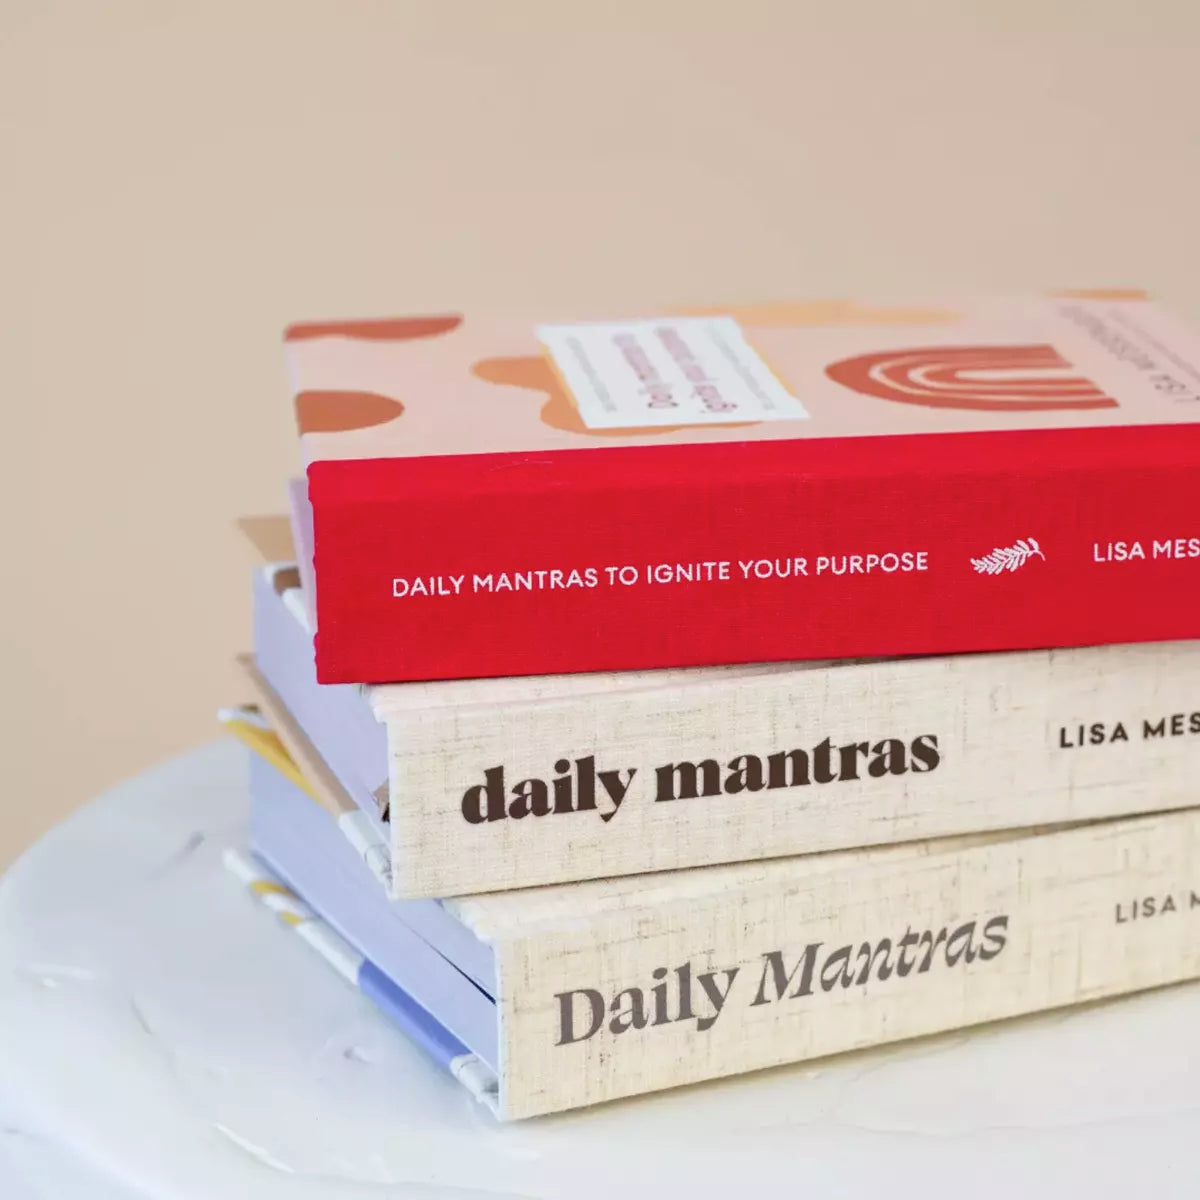 Three books, including one best seller and the second edition of Daily Mantras to Ignite Your Purpose, stacked on top of each other.